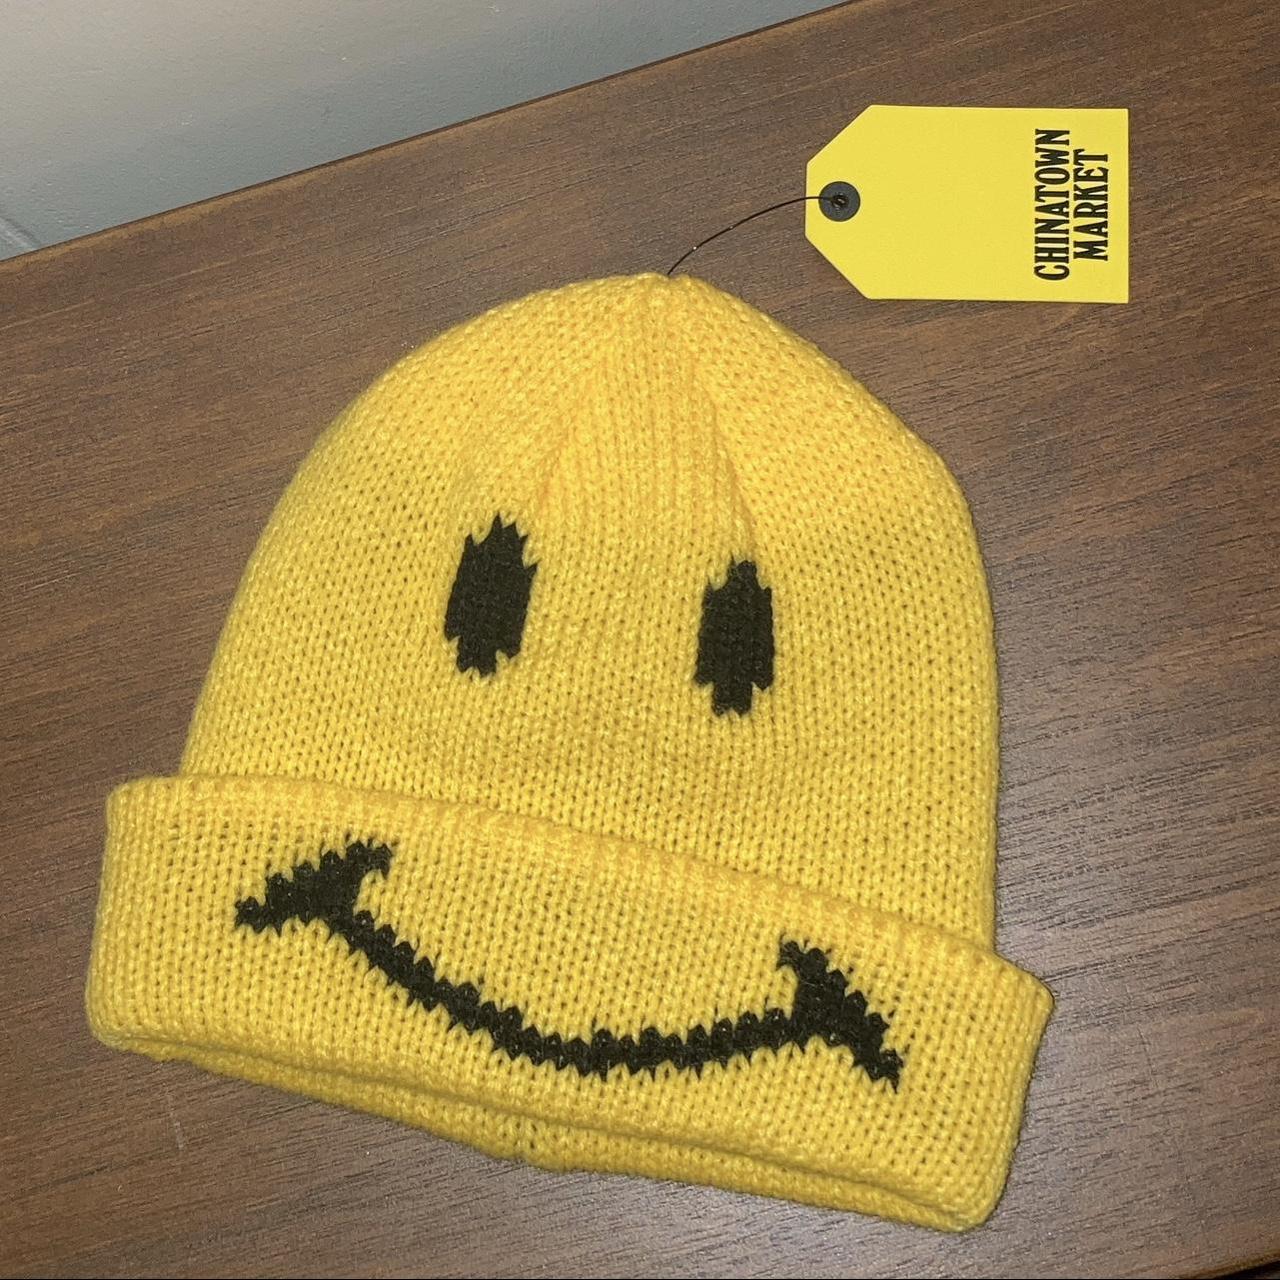 Formand betale sig Fortære CHINATOWN MARKET X Smiley beanie. Tried on once.... - Depop